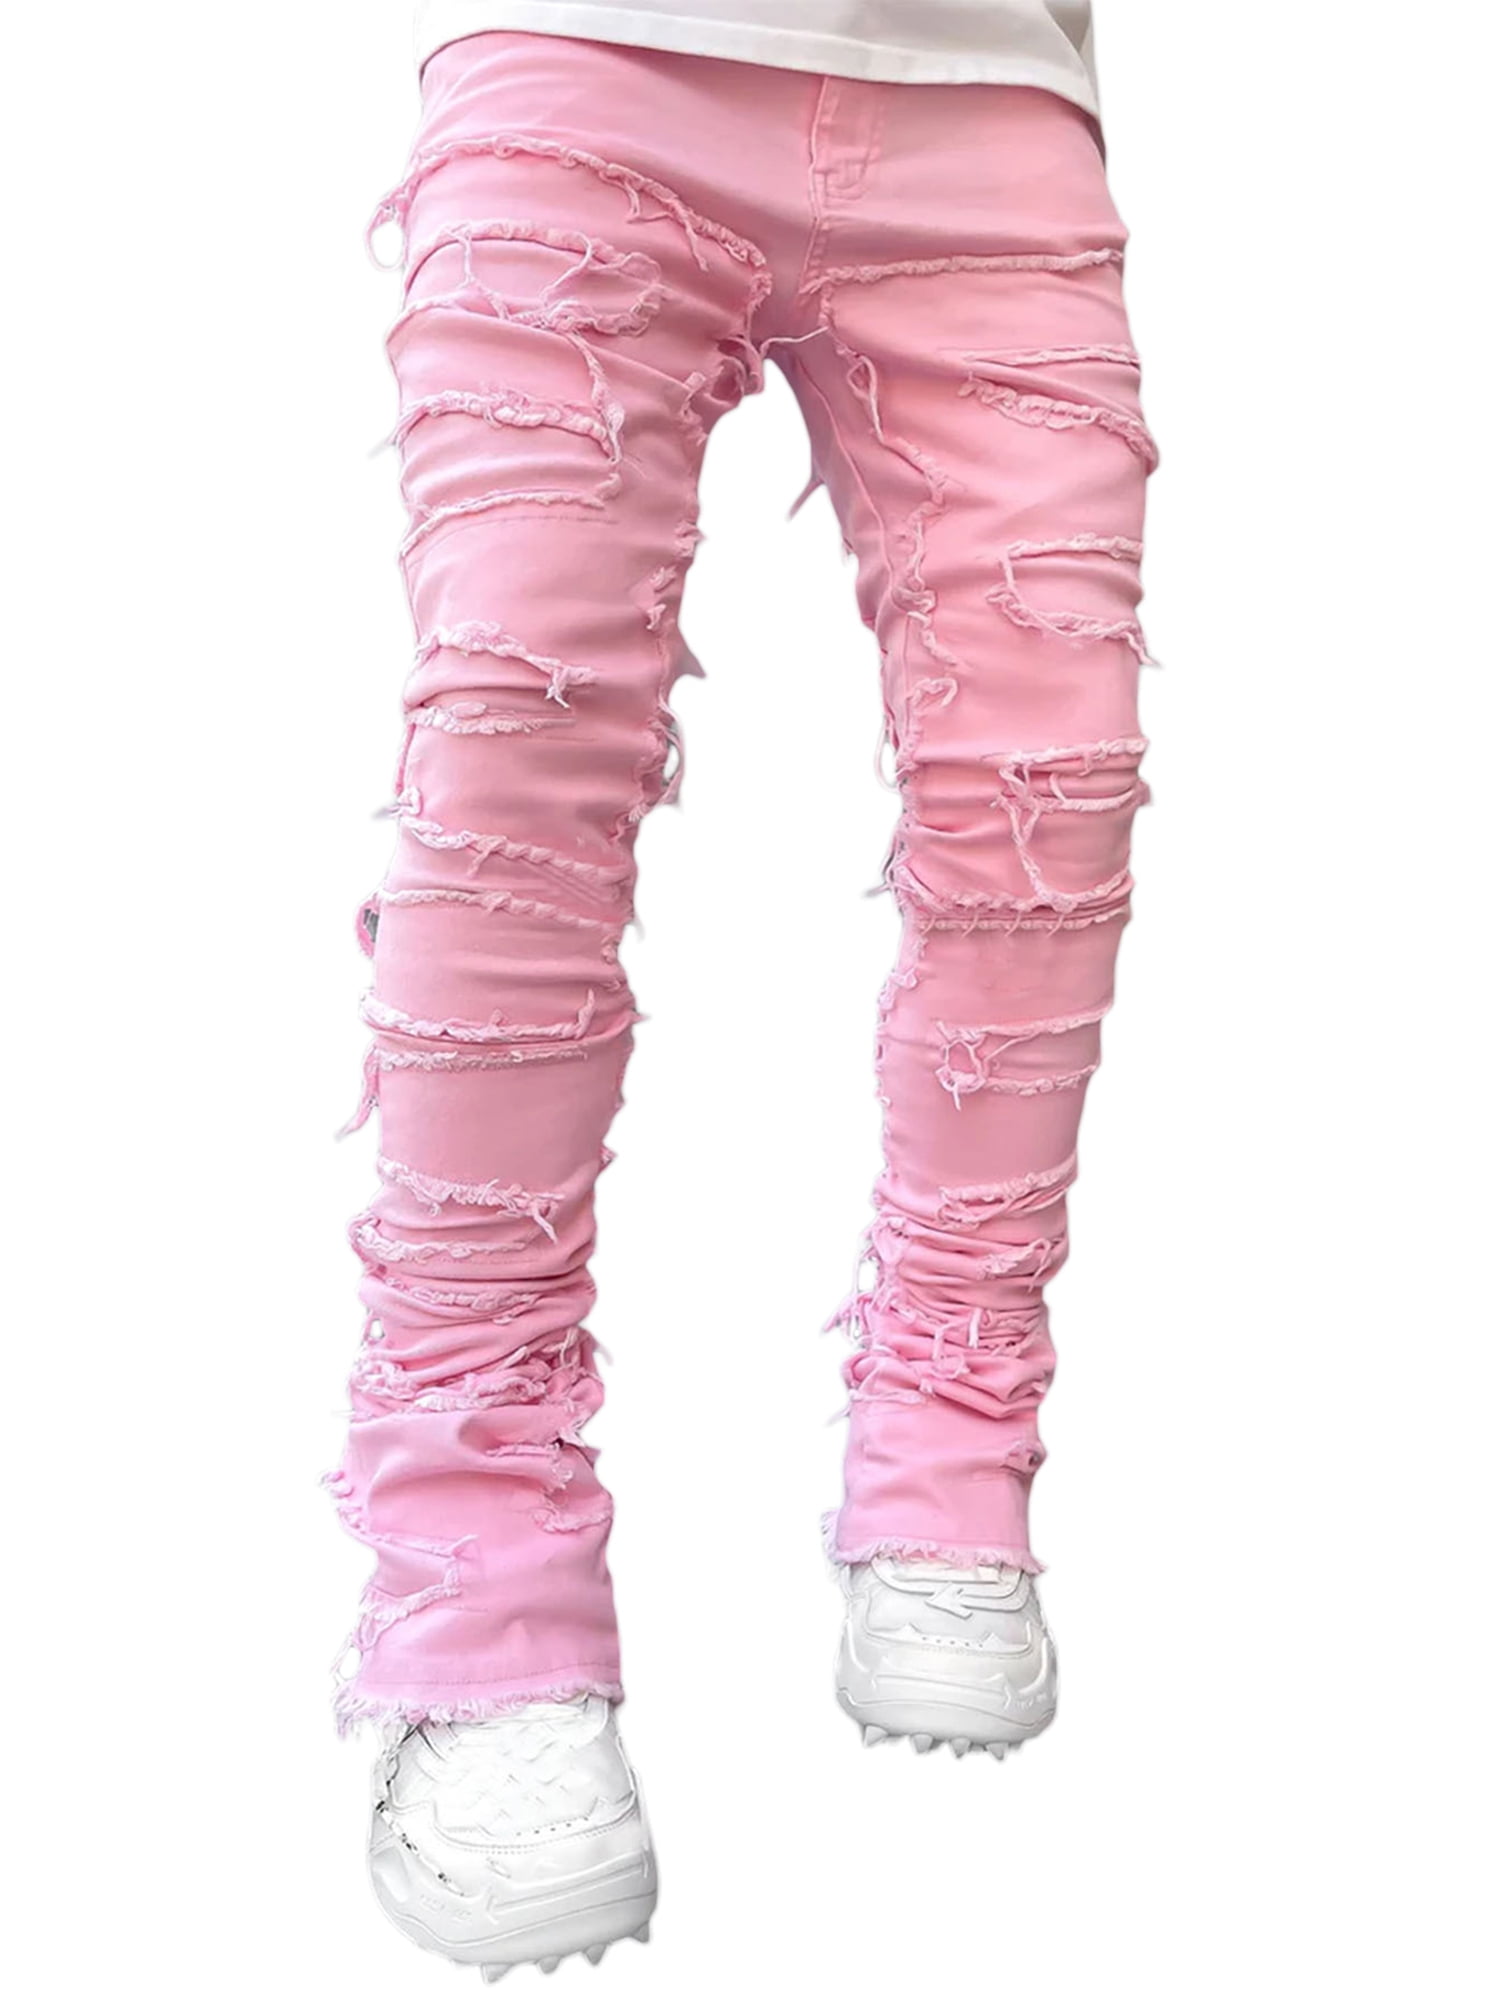  Kodaruber Mens Stacked Jeans Slim Fit Ripped Skinny Stretch  Jeans Distressed Straight Denim Pants Hip Hop Trousers Streetwear(02  Beige,Small) : Clothing, Shoes & Jewelry